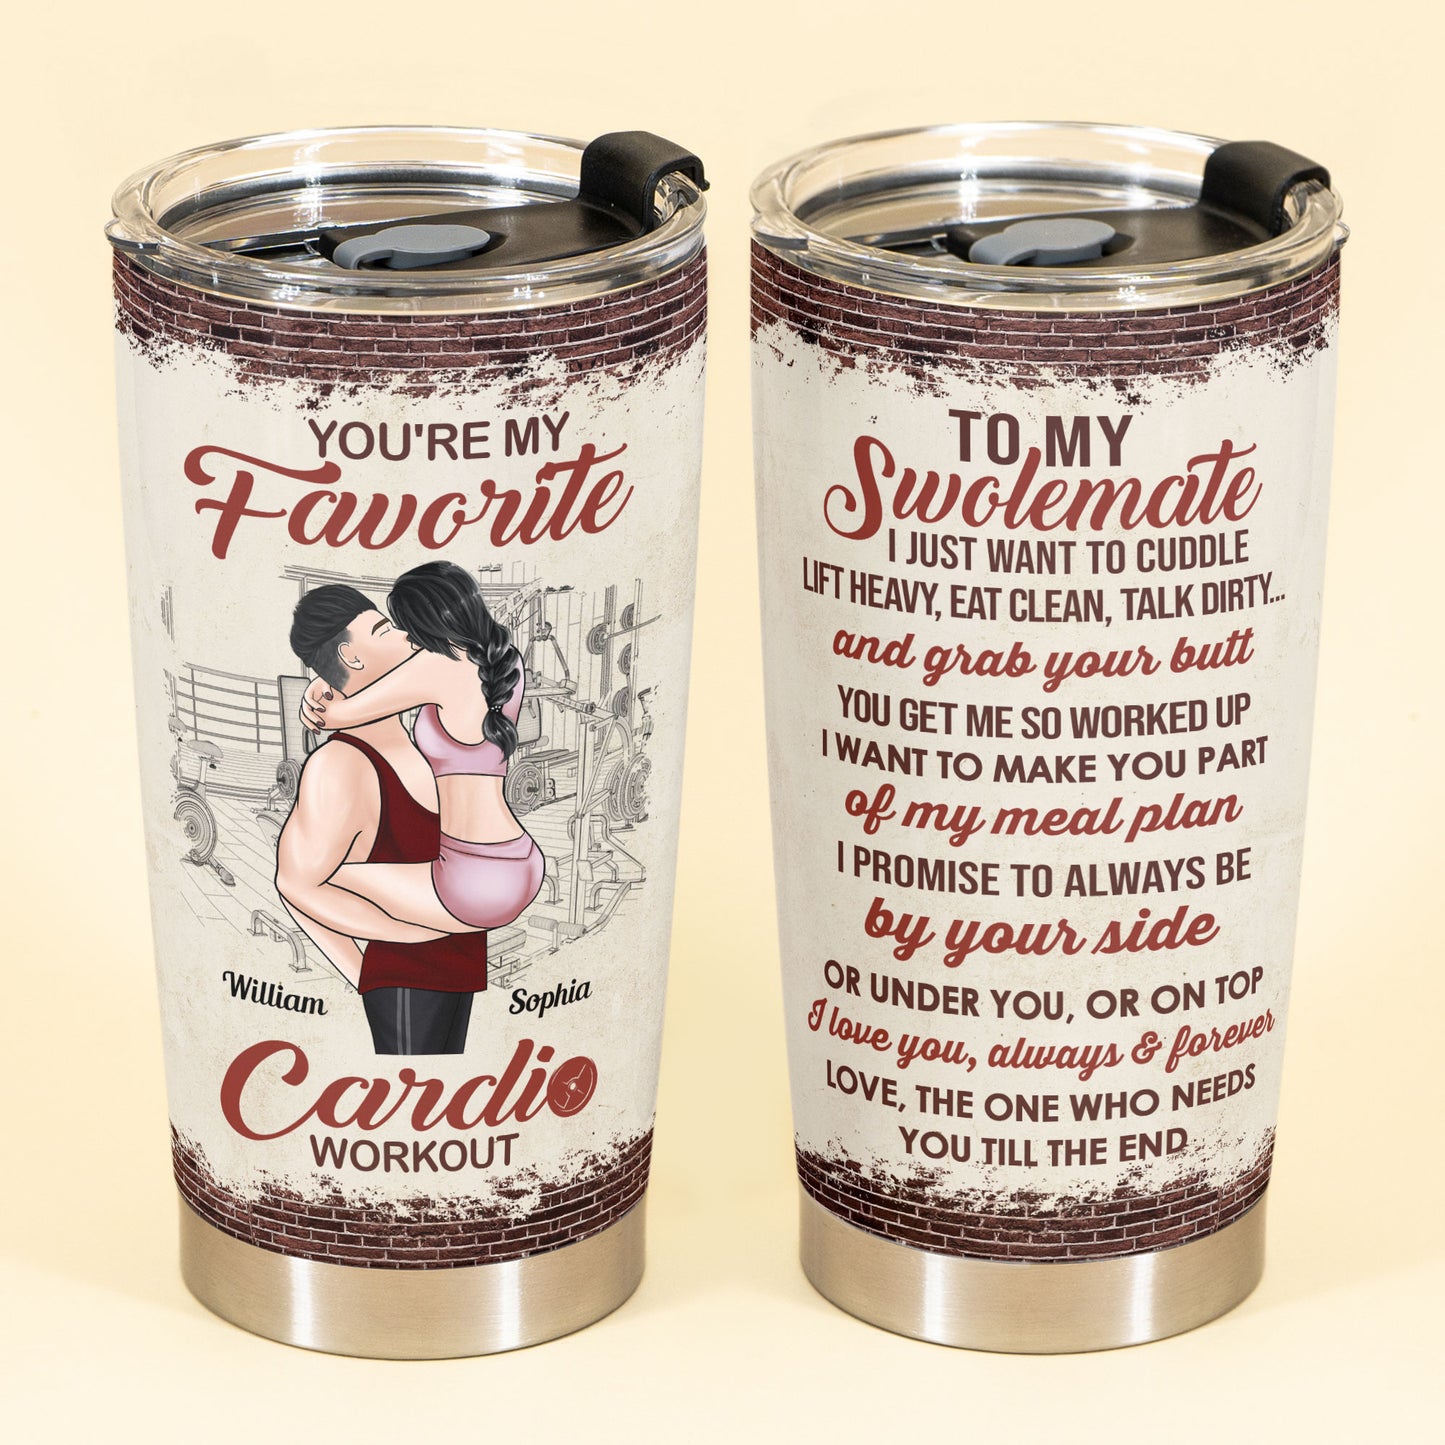 https://macorner.co/cdn/shop/products/YouRe-My-Favorite-Cardio-Workout-Personalized-Tumbler-Cup-Birthday-Loving-Gift-For-Gym-couple-Lover-Husband-Wife-2.jpg?v=1656411960&width=1445